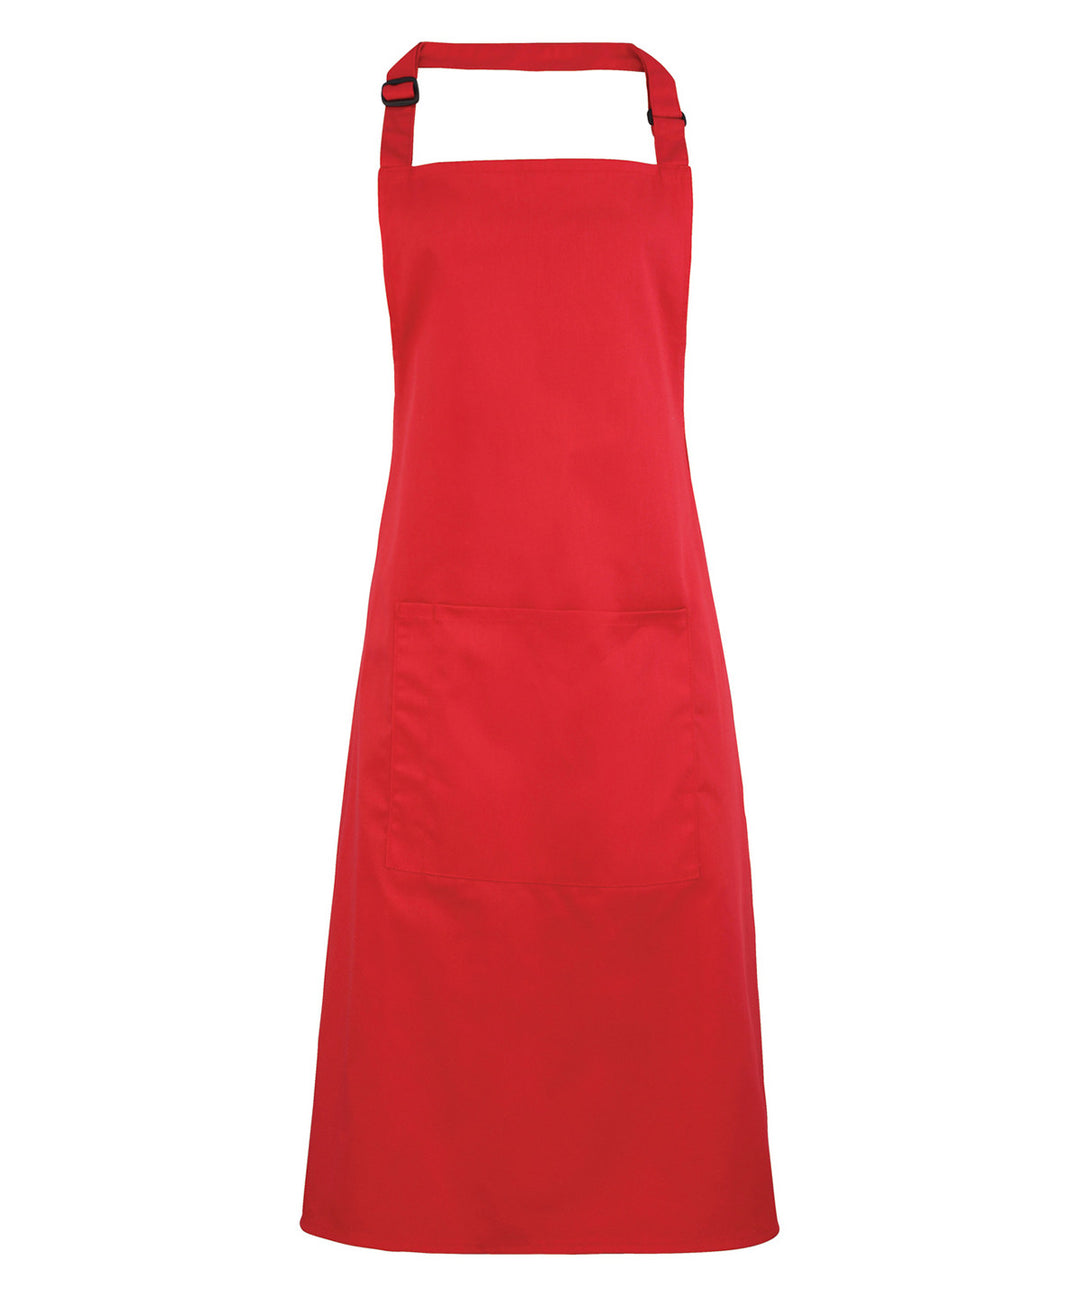 a red apron on a white background